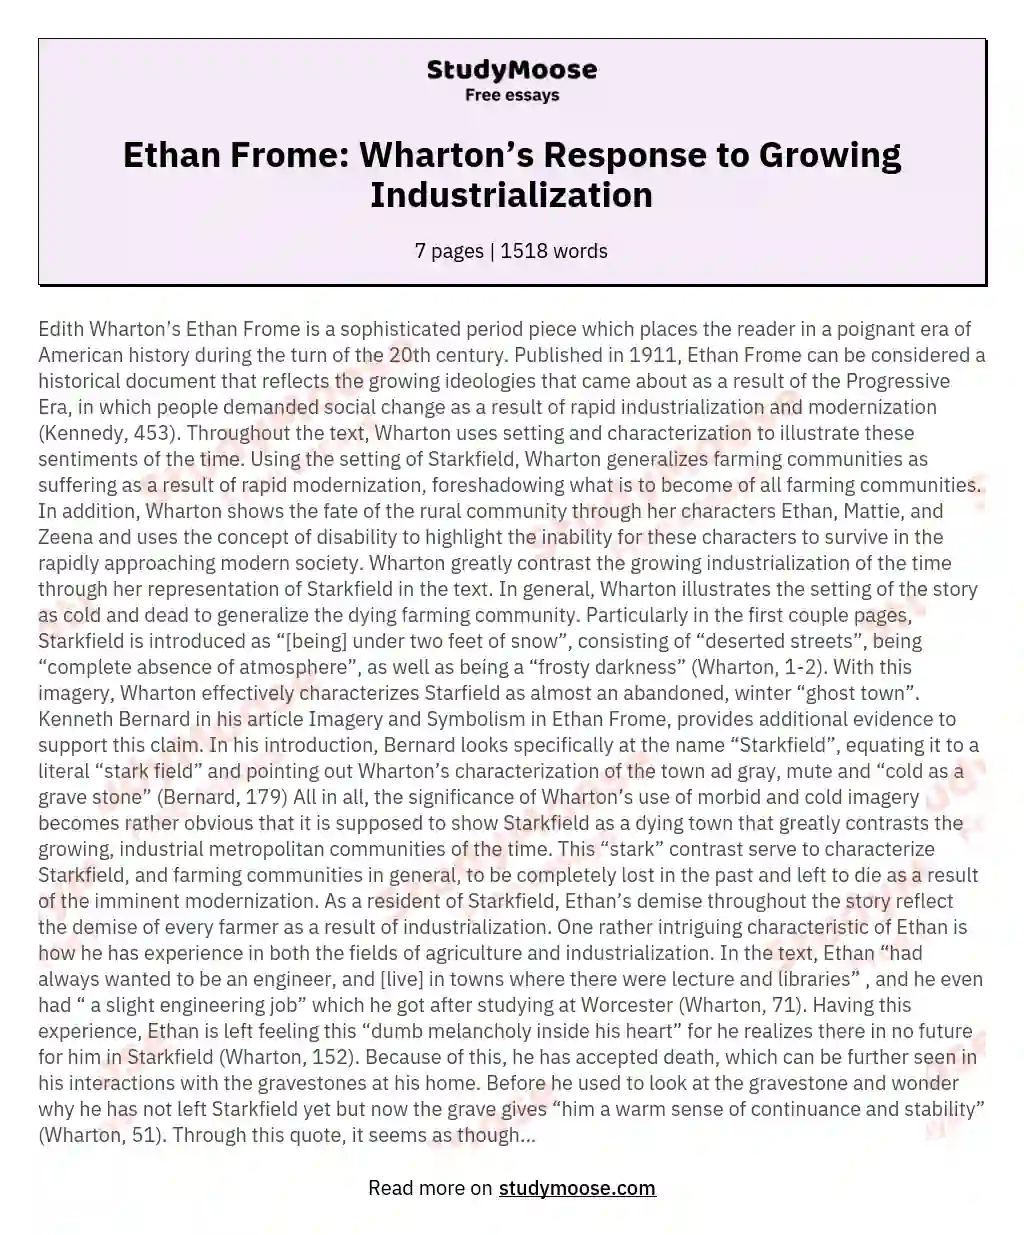 Ethan Frome: Wharton’s Response to Growing Industrialization essay